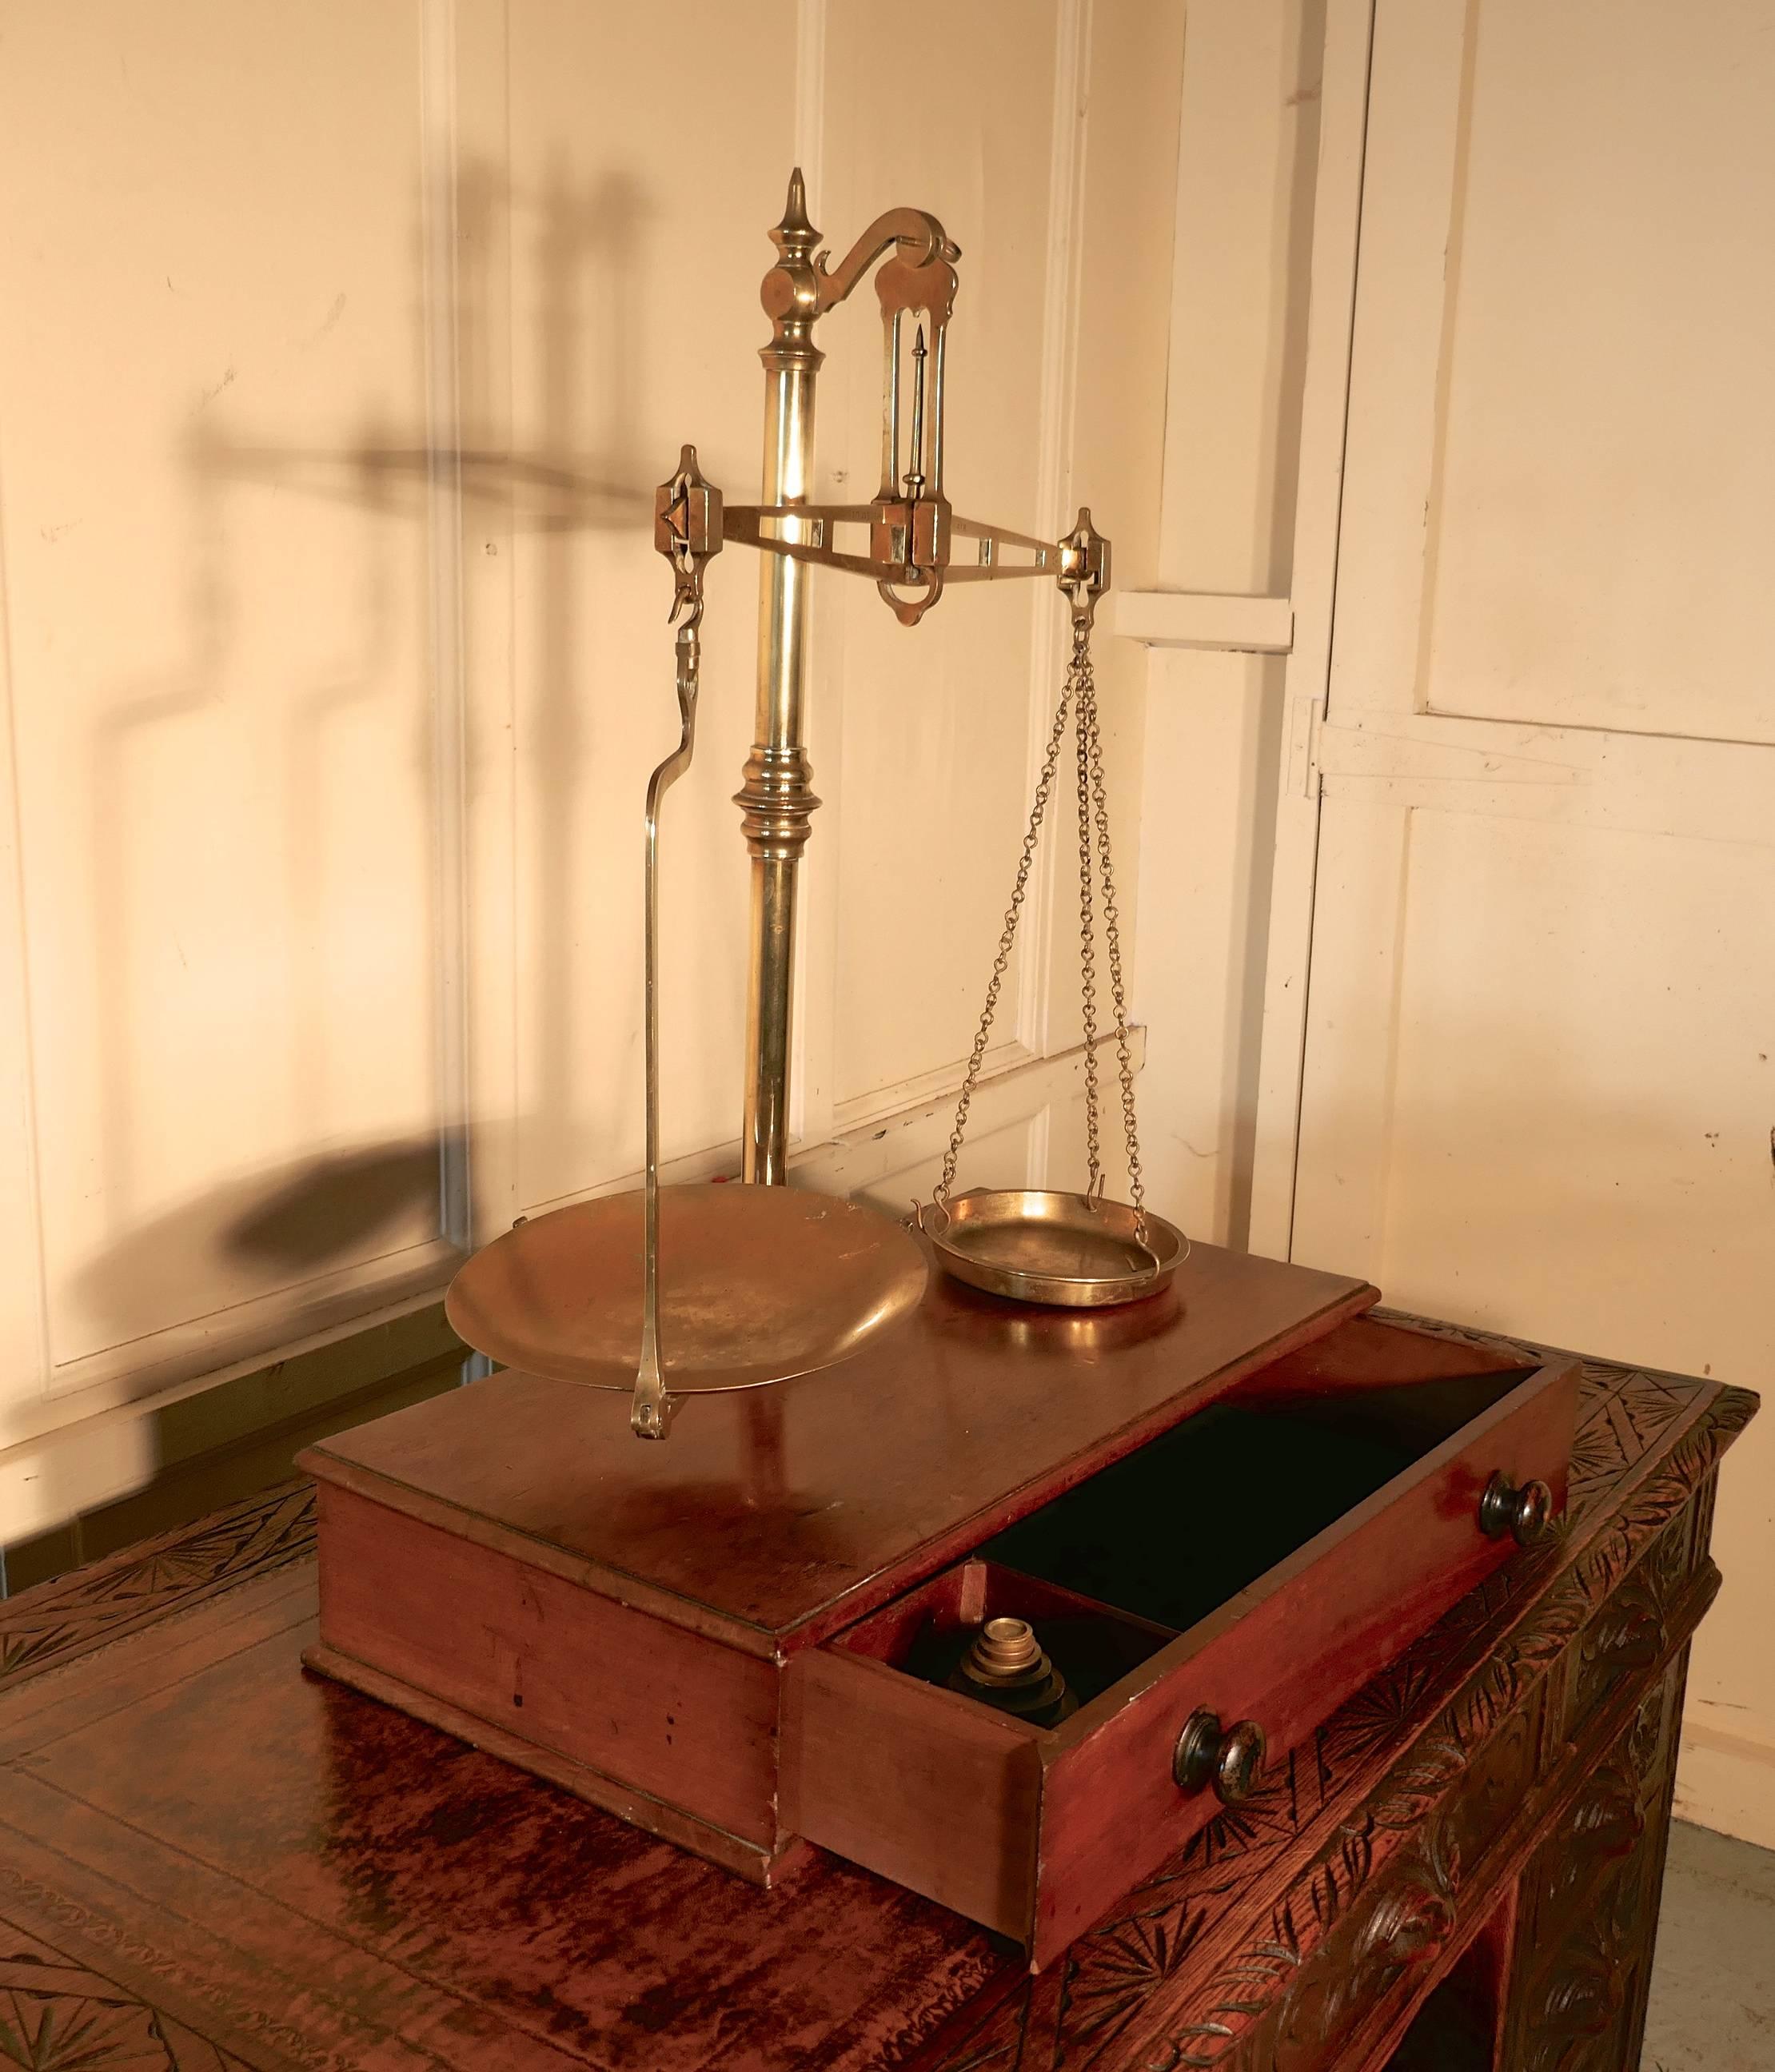 Superb set of Brass Sweetie Balance Scales by Avery

This attractive Brass balance scale on a mahogany box base has a drawer, it has a beam mechanism and was probably used in a shop although the scales can be completely dismantled and packed away in